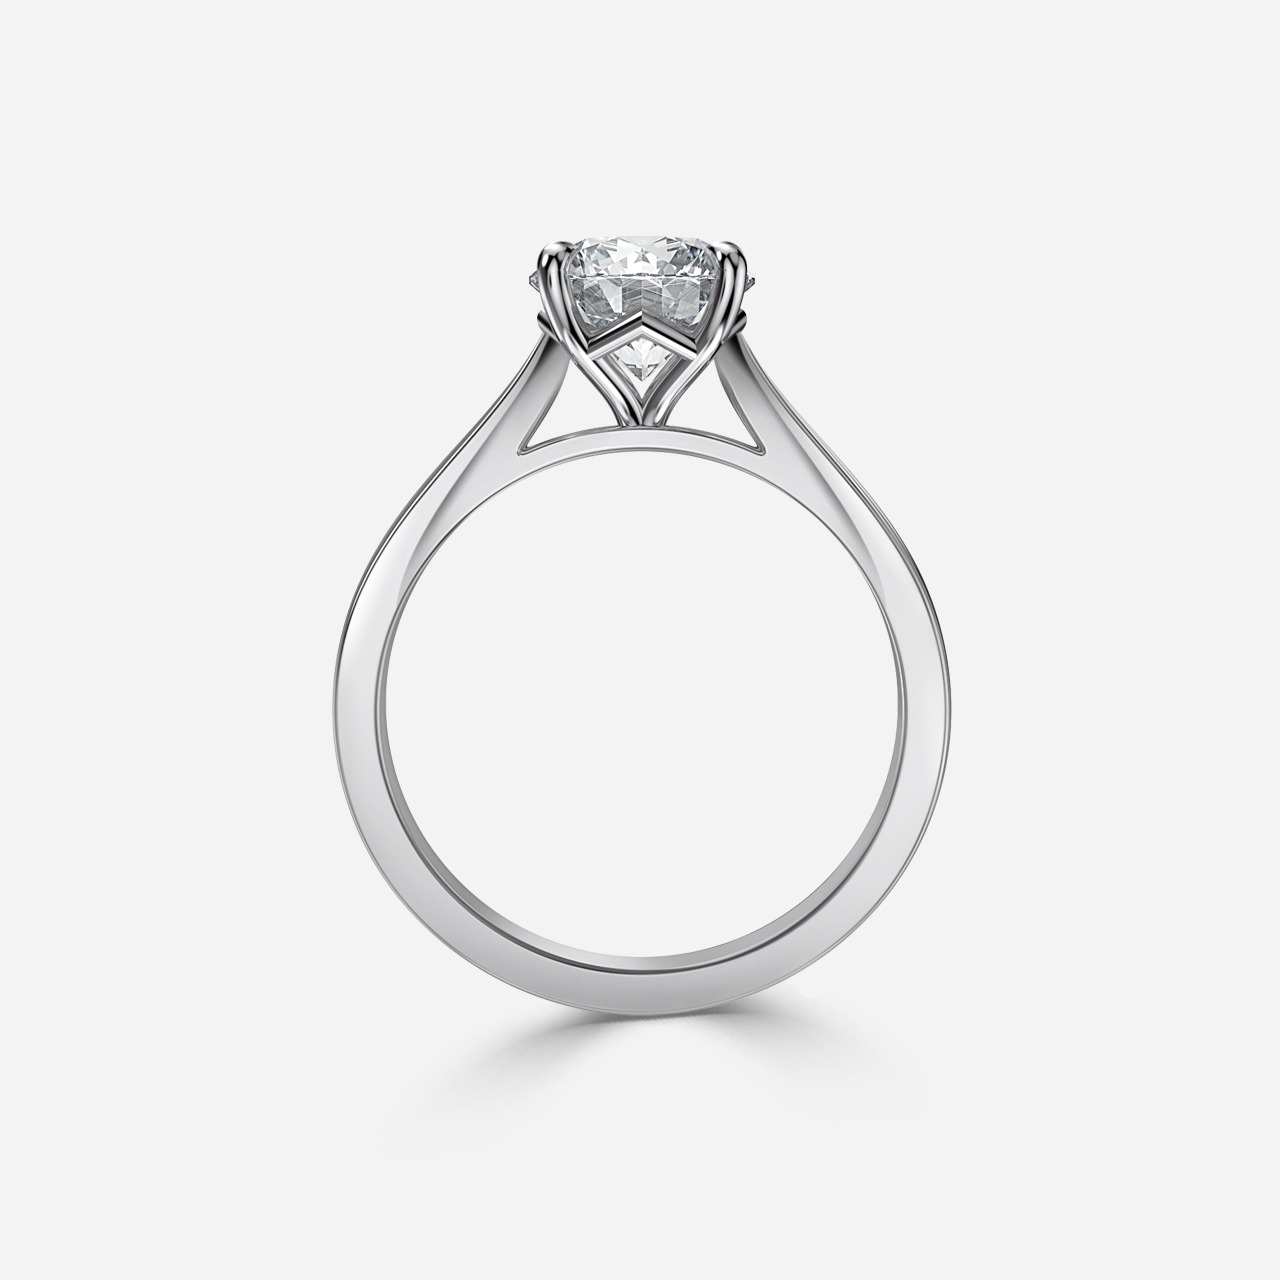 Tulip White Gold Solitaire Engagement Ring